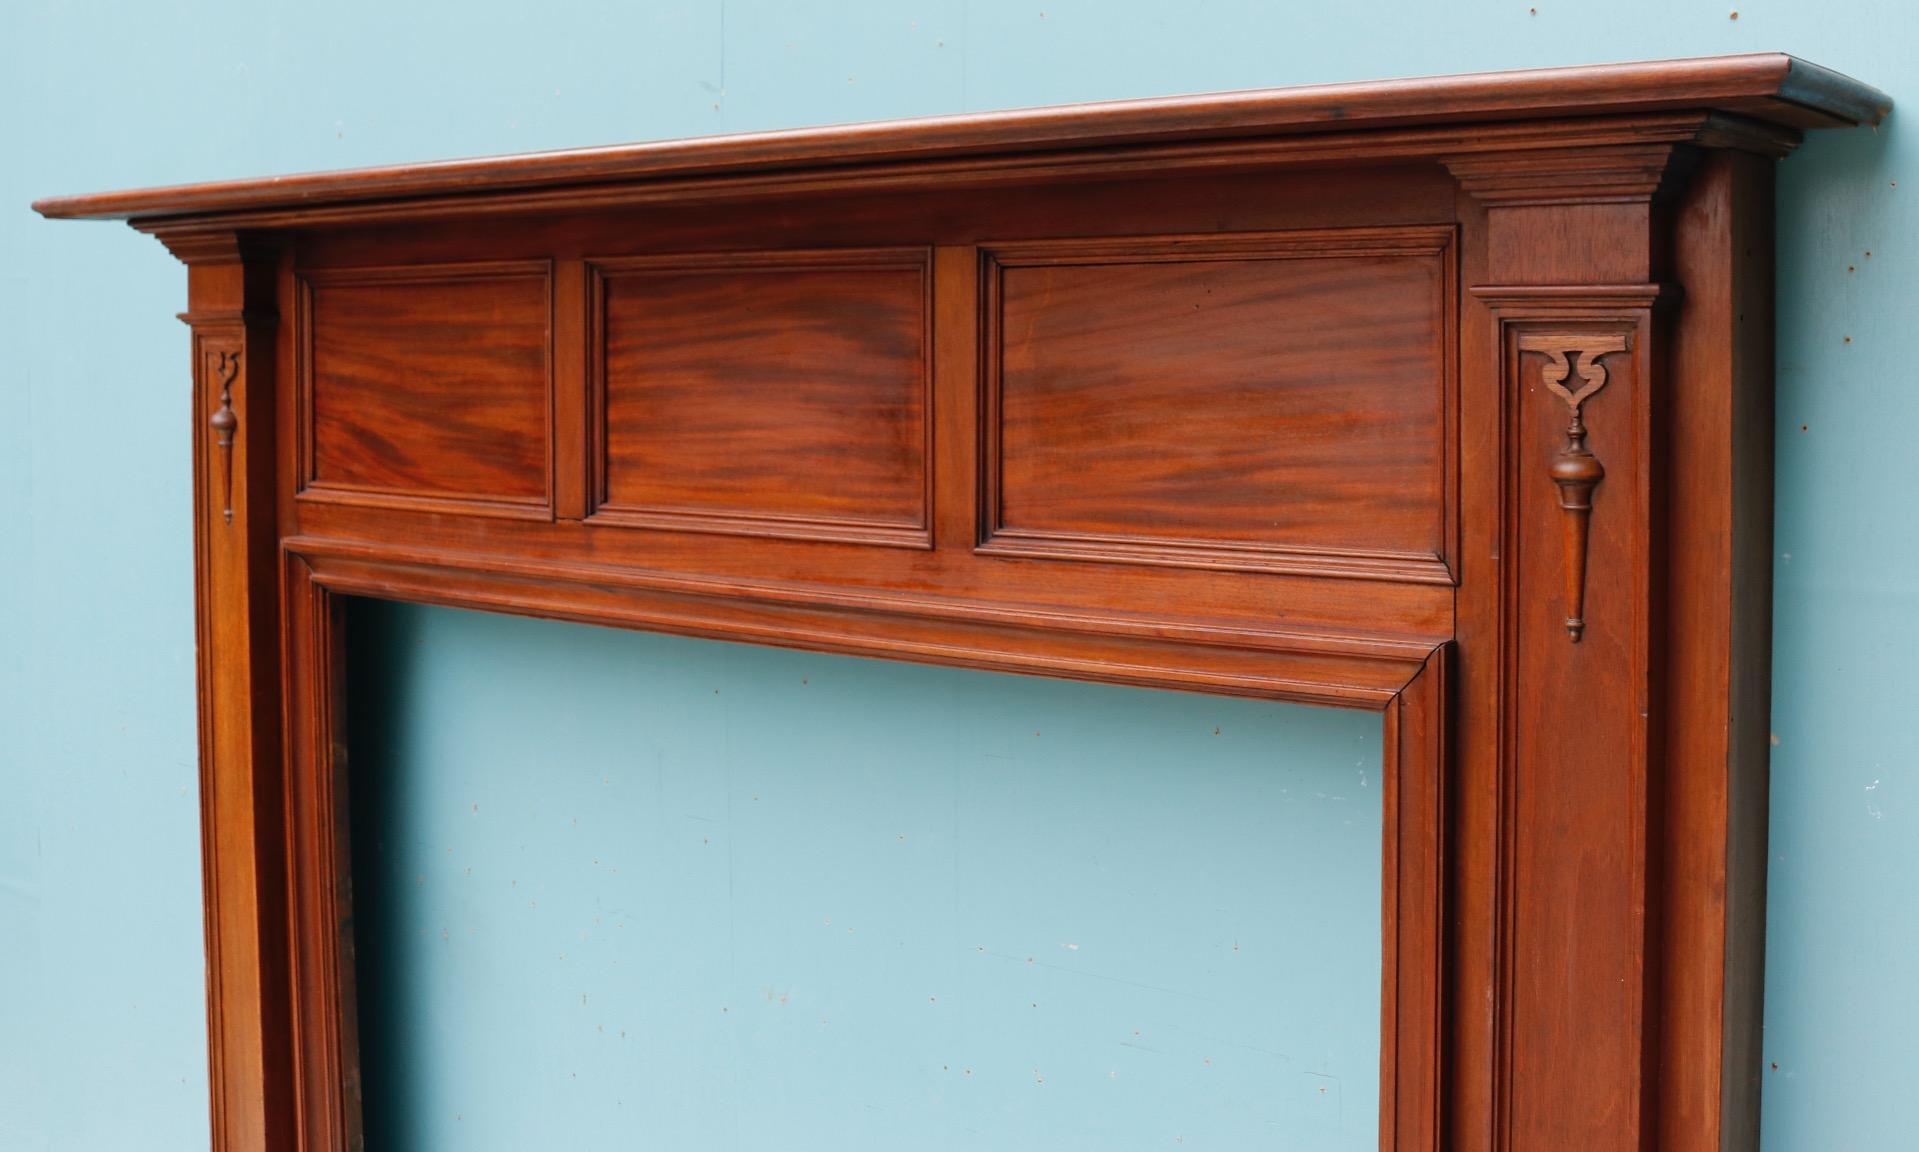 A reclaimed Edwardian style mahogany fire surround.
Additional Dimensions
Opening height 102 cm
Opening width 112 cm
Width between outsides of the foot blocks 157 cm.